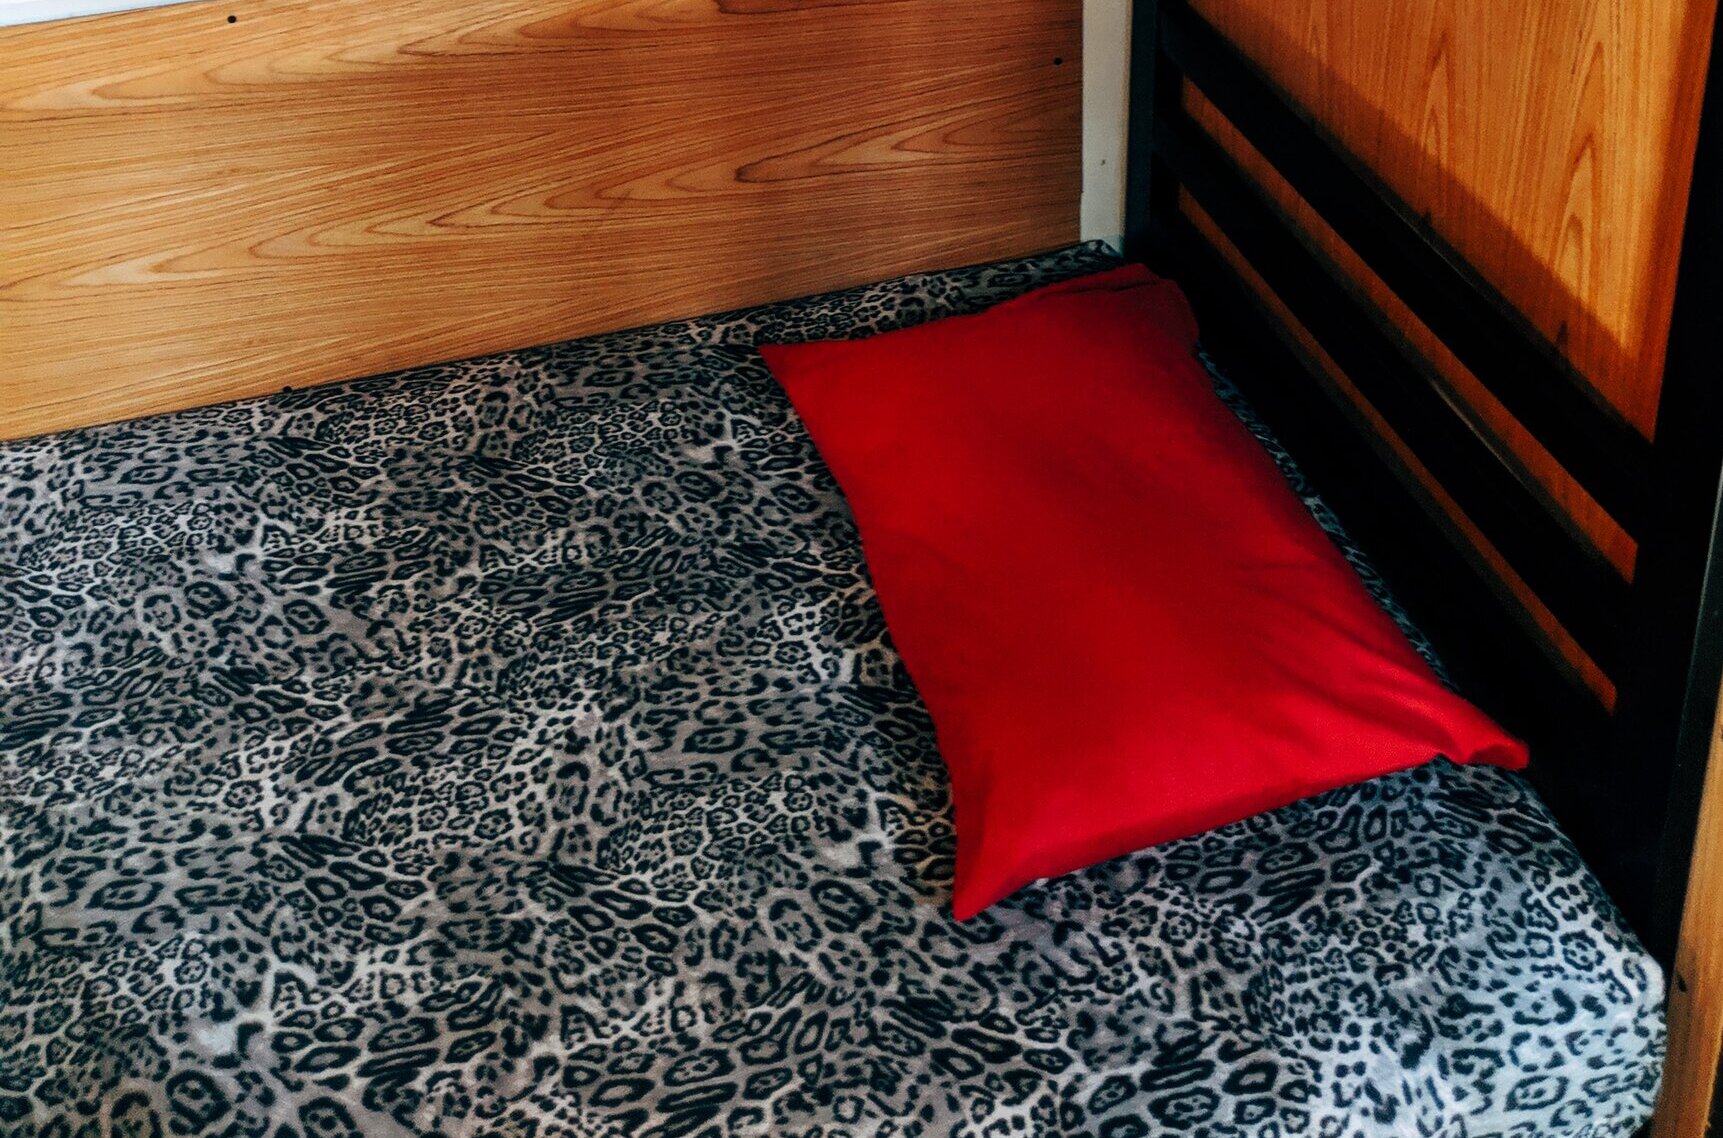 bunkbed with a red pillow